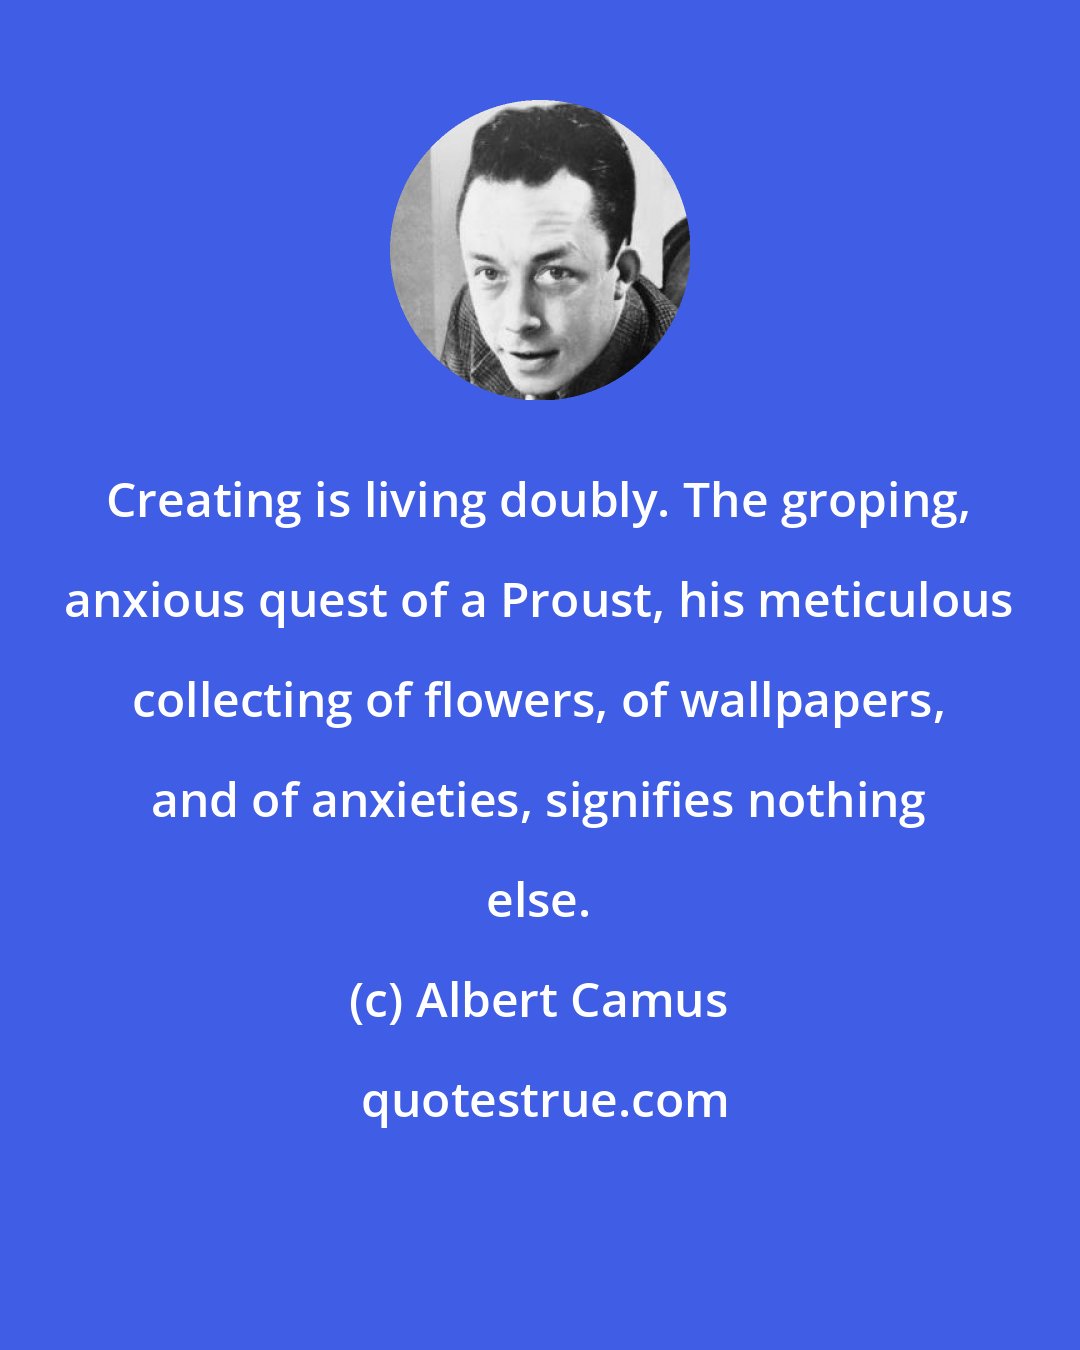 Albert Camus: Creating is living doubly. The groping, anxious quest of a Proust, his meticulous collecting of flowers, of wallpapers, and of anxieties, signifies nothing else.